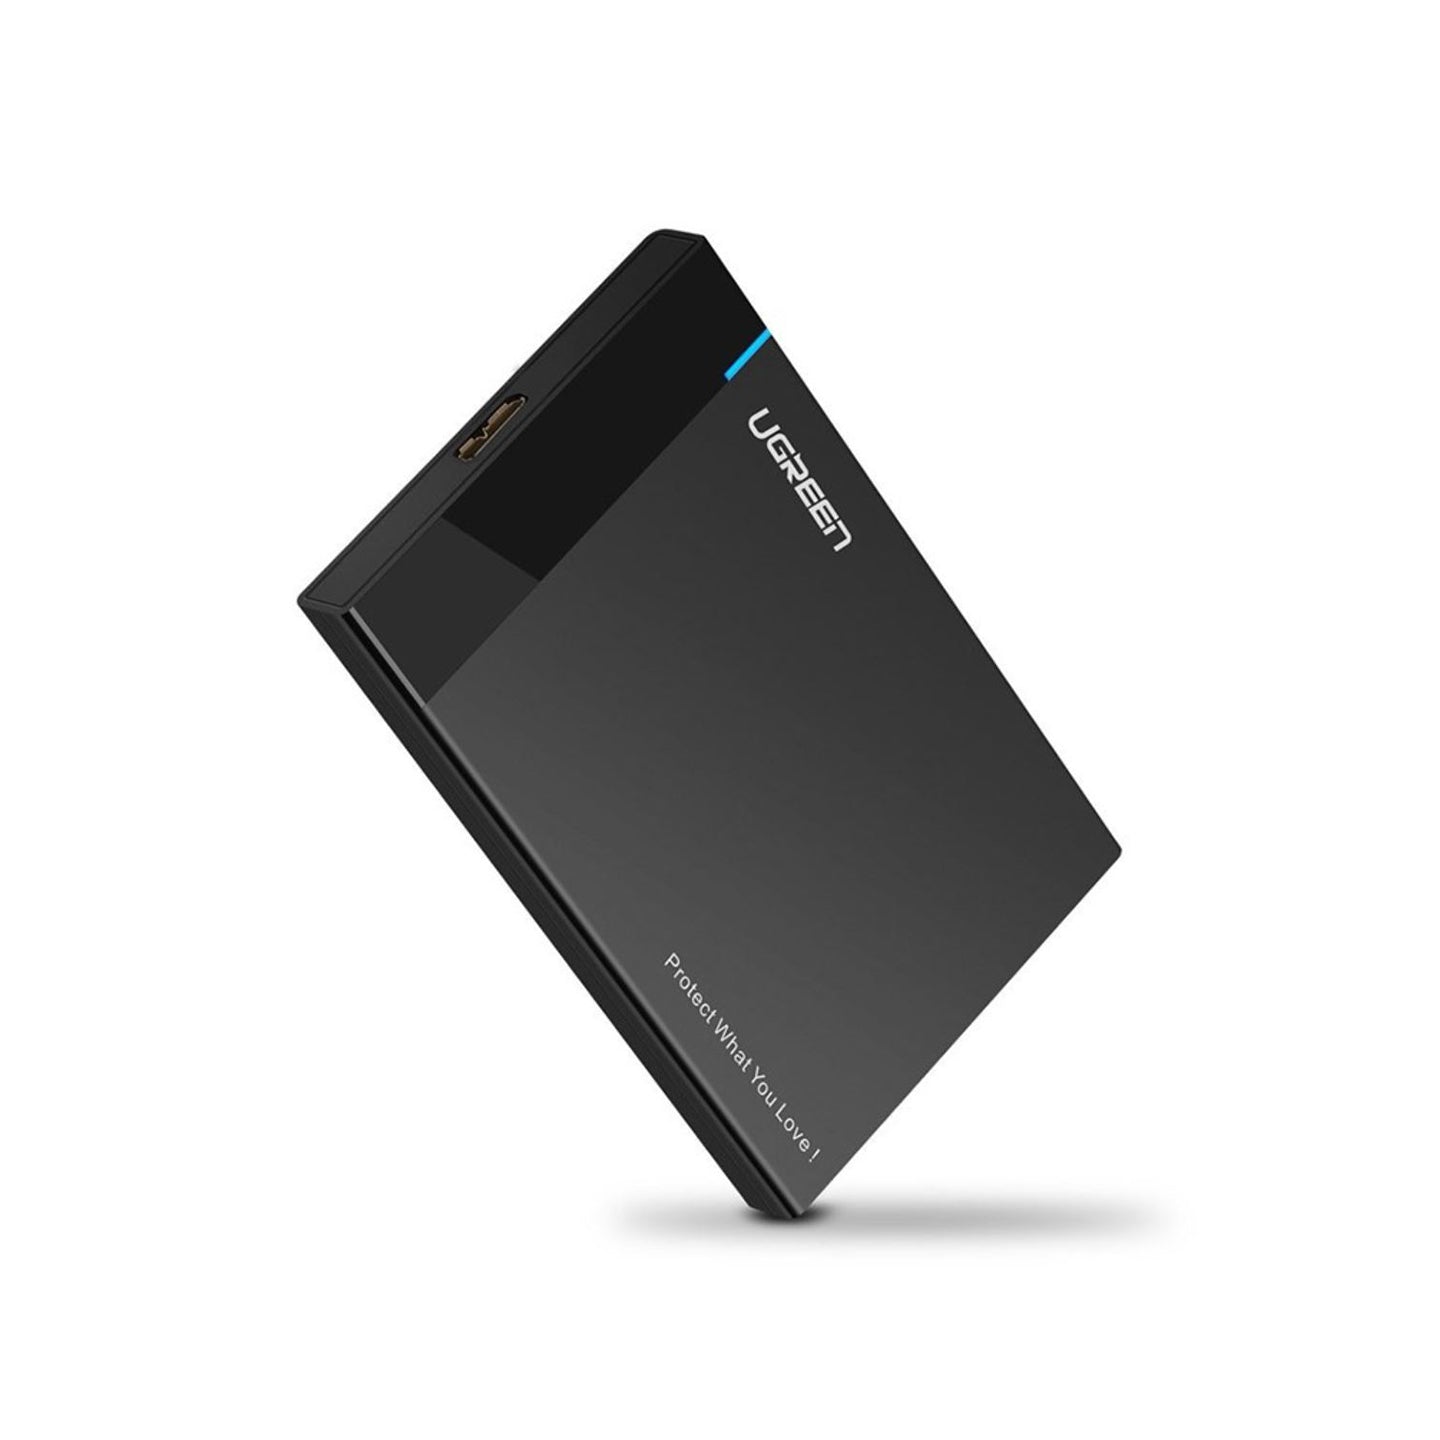 UGREEN External Hard Drive Enclosure 2.5" USB 3.0 to SATA III with UASP Support, 5Gbps Transfer Speed and Maximum Capacity of 6TB for HDD and SSD | 30847